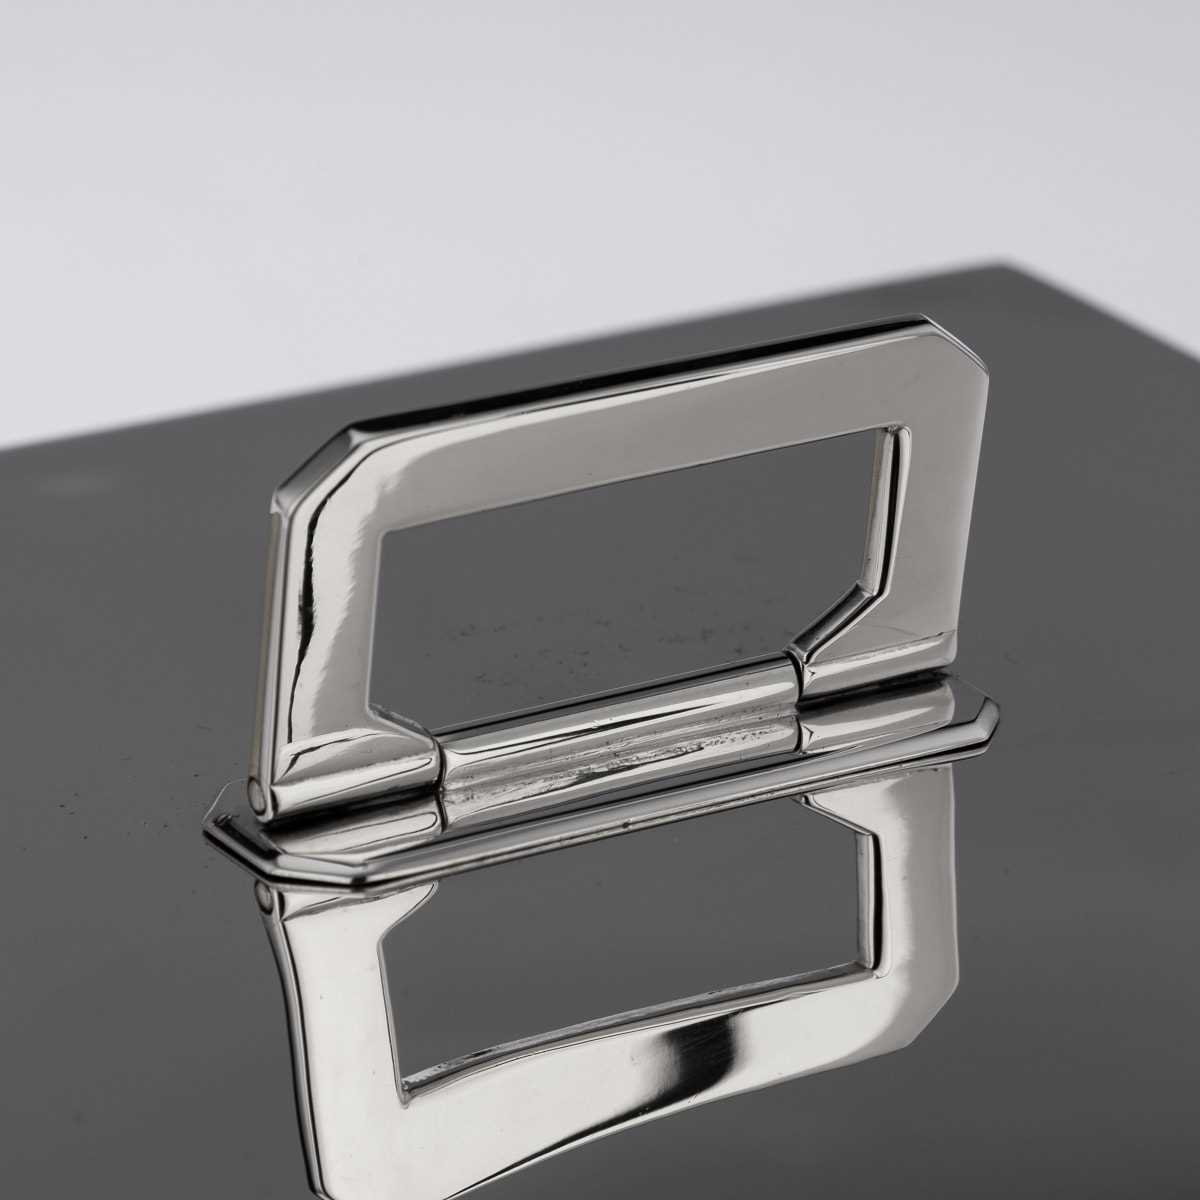 ASPREY & CO. : A PAIR OF STERLING SILVER ART DECO CIGAR BOXES, C. 1936 - Image 14 of 14